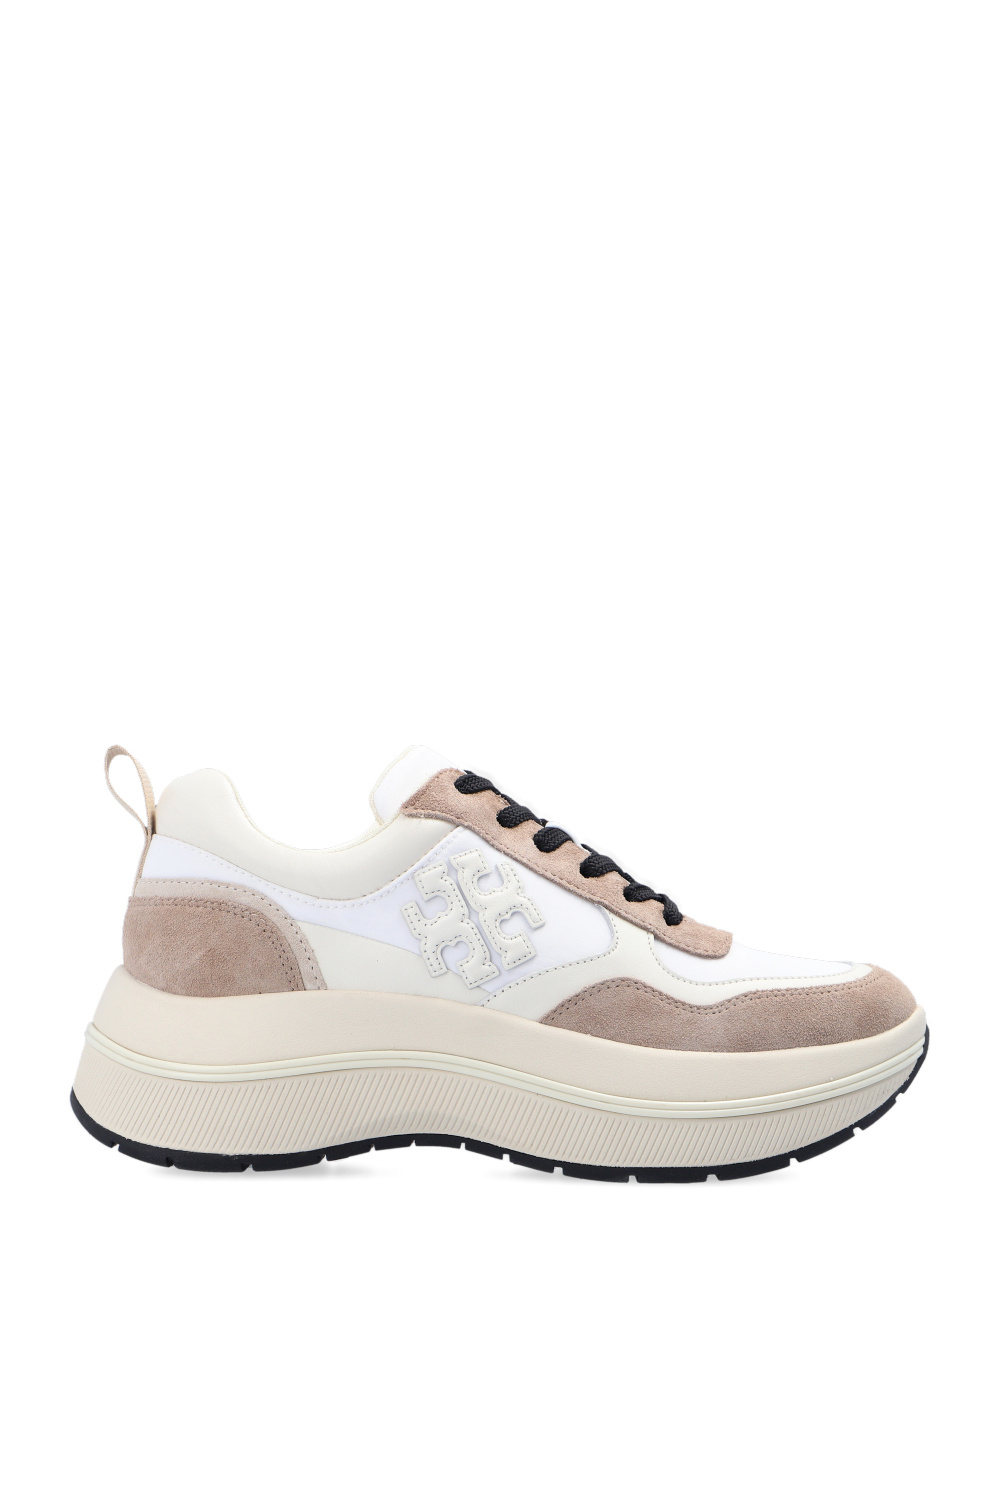 Cream Sneakers with logo Tory Burch - Vitkac France